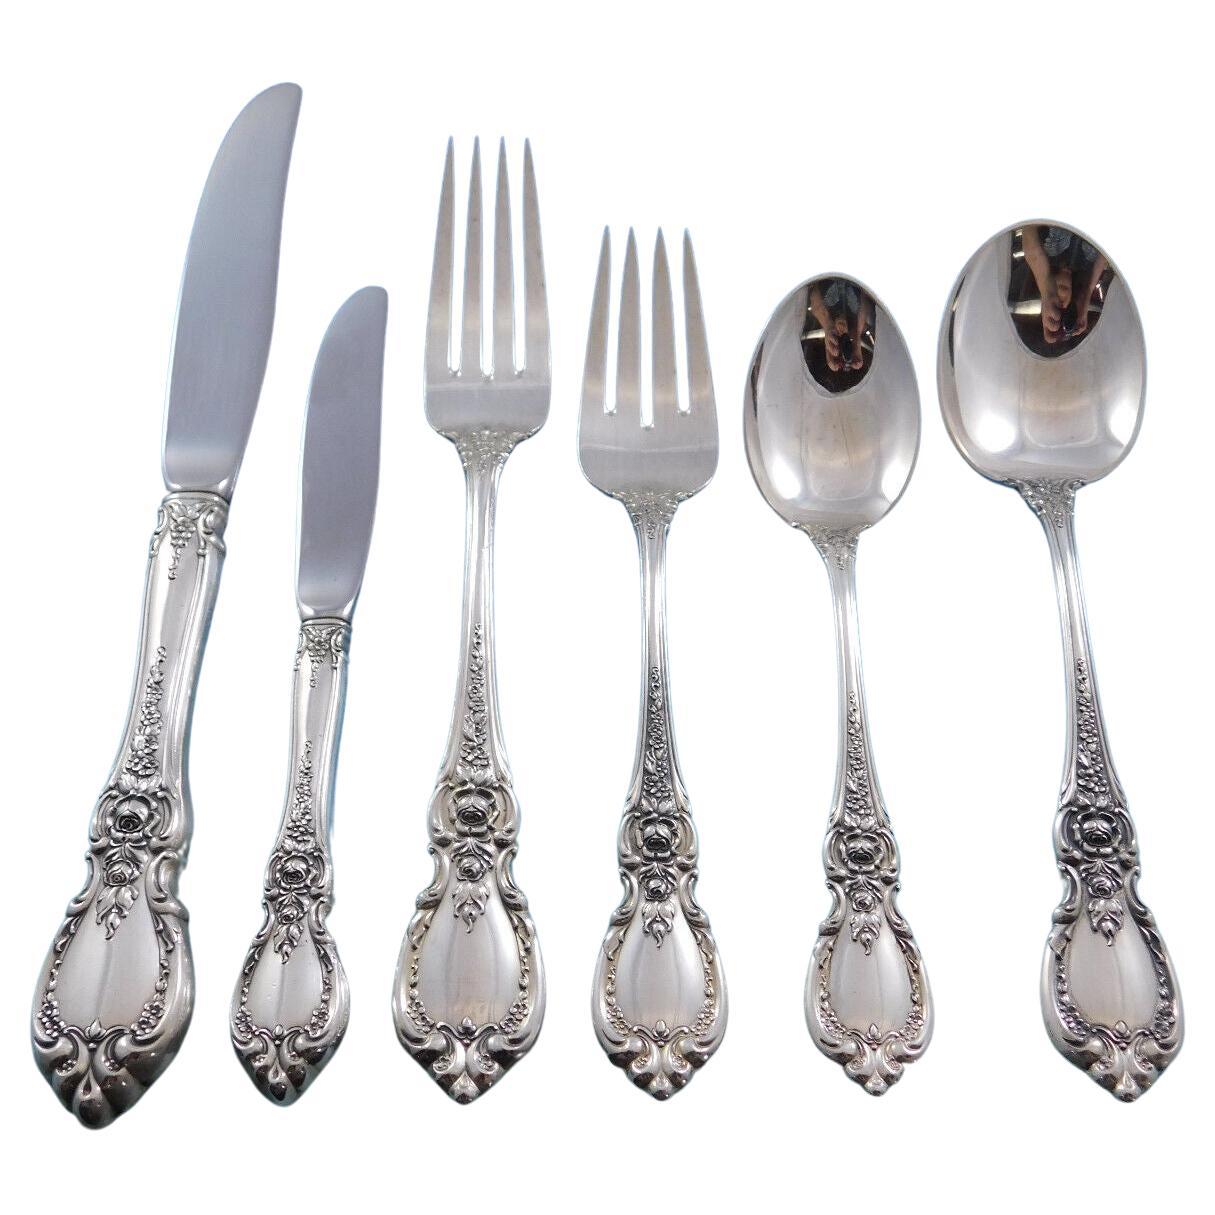 Charlemagne by Towle Sterling Silber Besteck für 12 Personen 76 Pieces